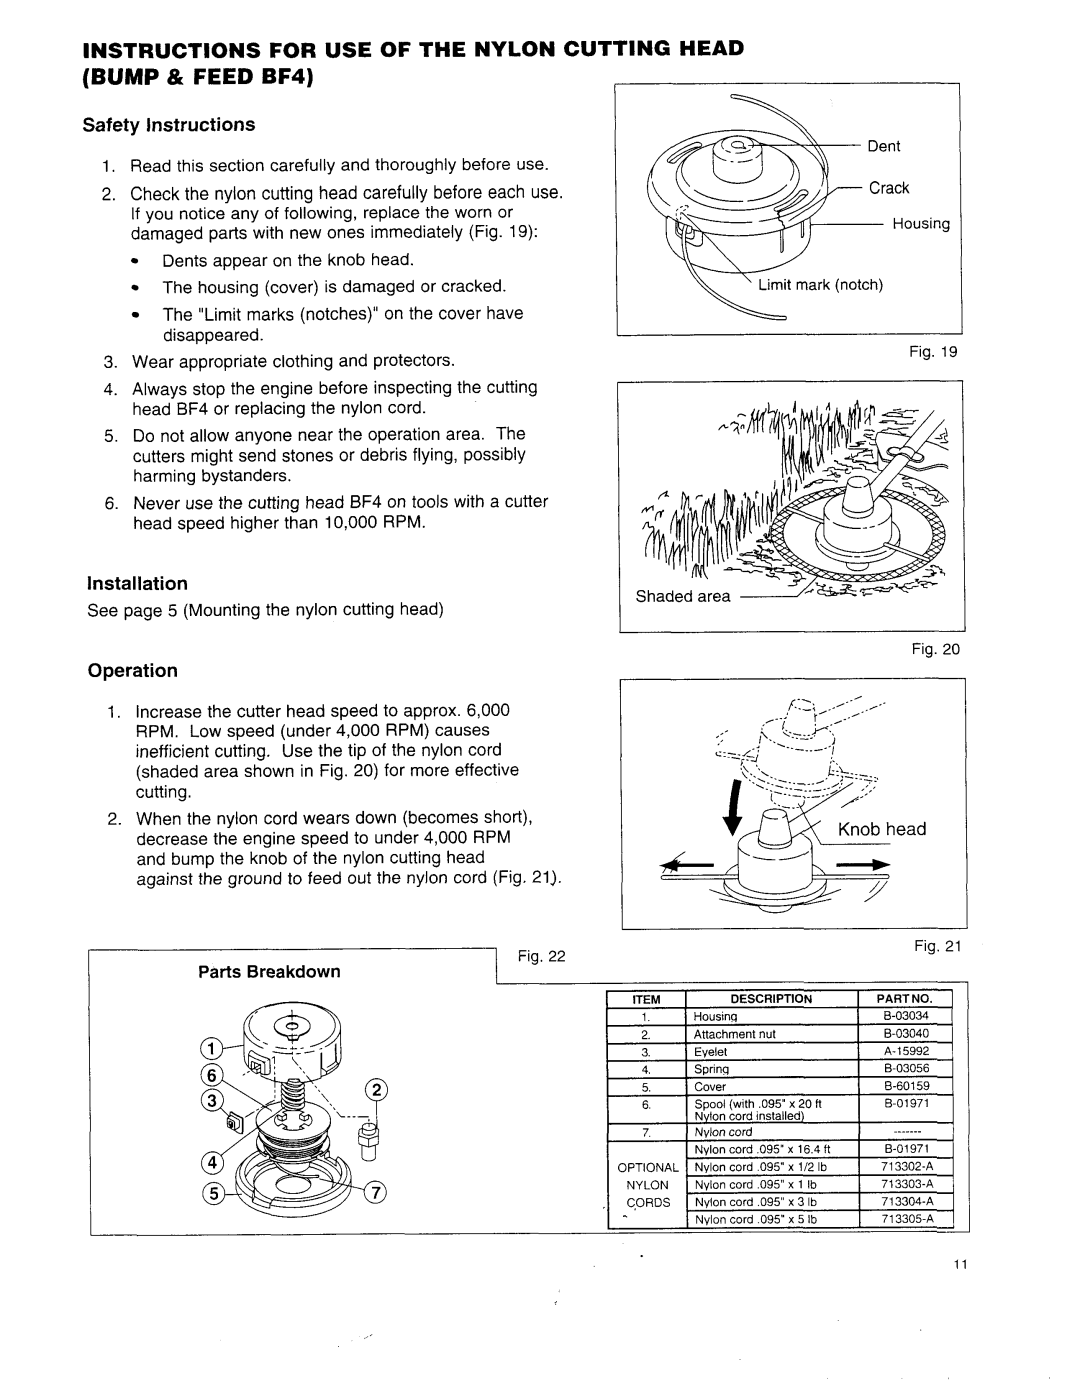 Makita RBC25A BUMP & FEED BF4, Instructions For Use Of The Nylon Cutting Head, Safety Instructions, Installation 